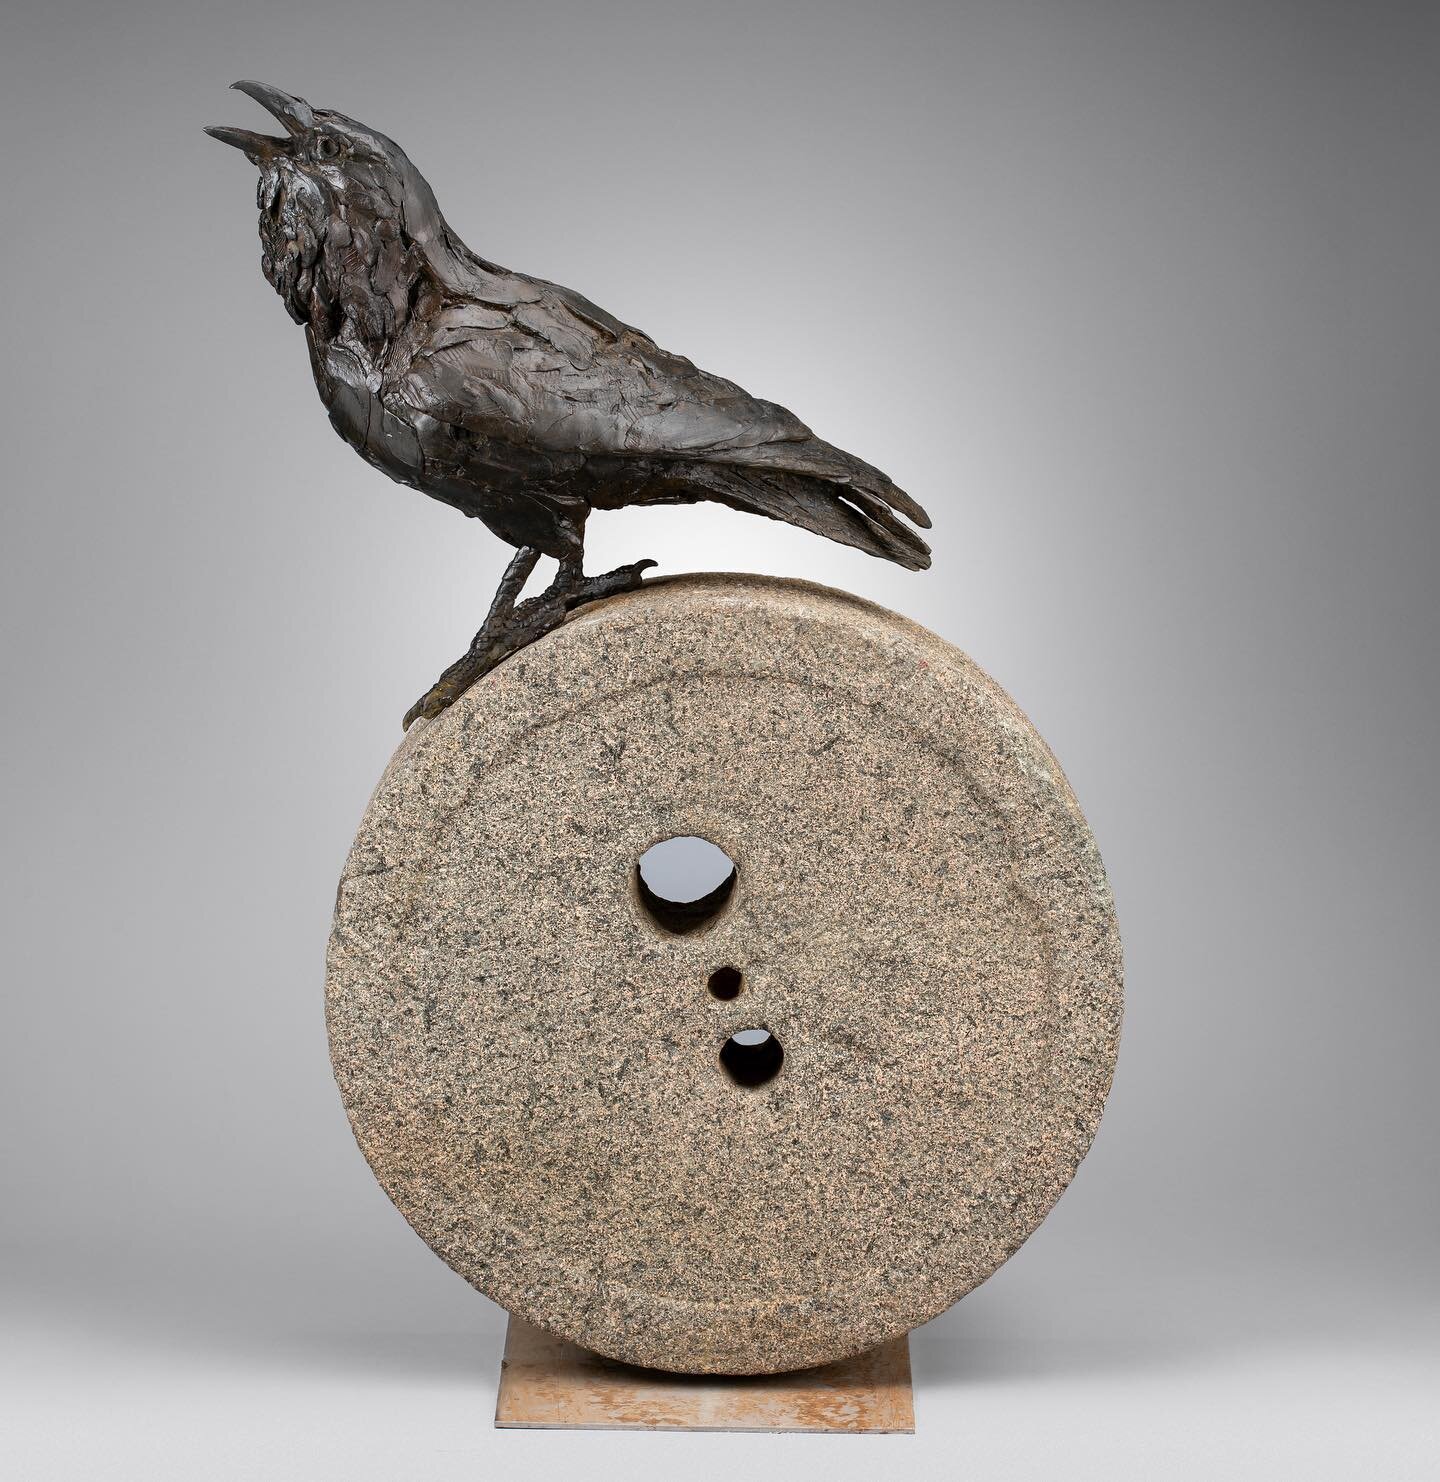 &ldquo;Raven Celebrates Inventing the Wheel&rdquo; has been juried into the @nationalsculpturesociety 90th Annual exhibition. The exhibition will be @brookgreen_gardens So happy with this news. 
Here&rsquo;s her story;
Raven, being the cleverest of a